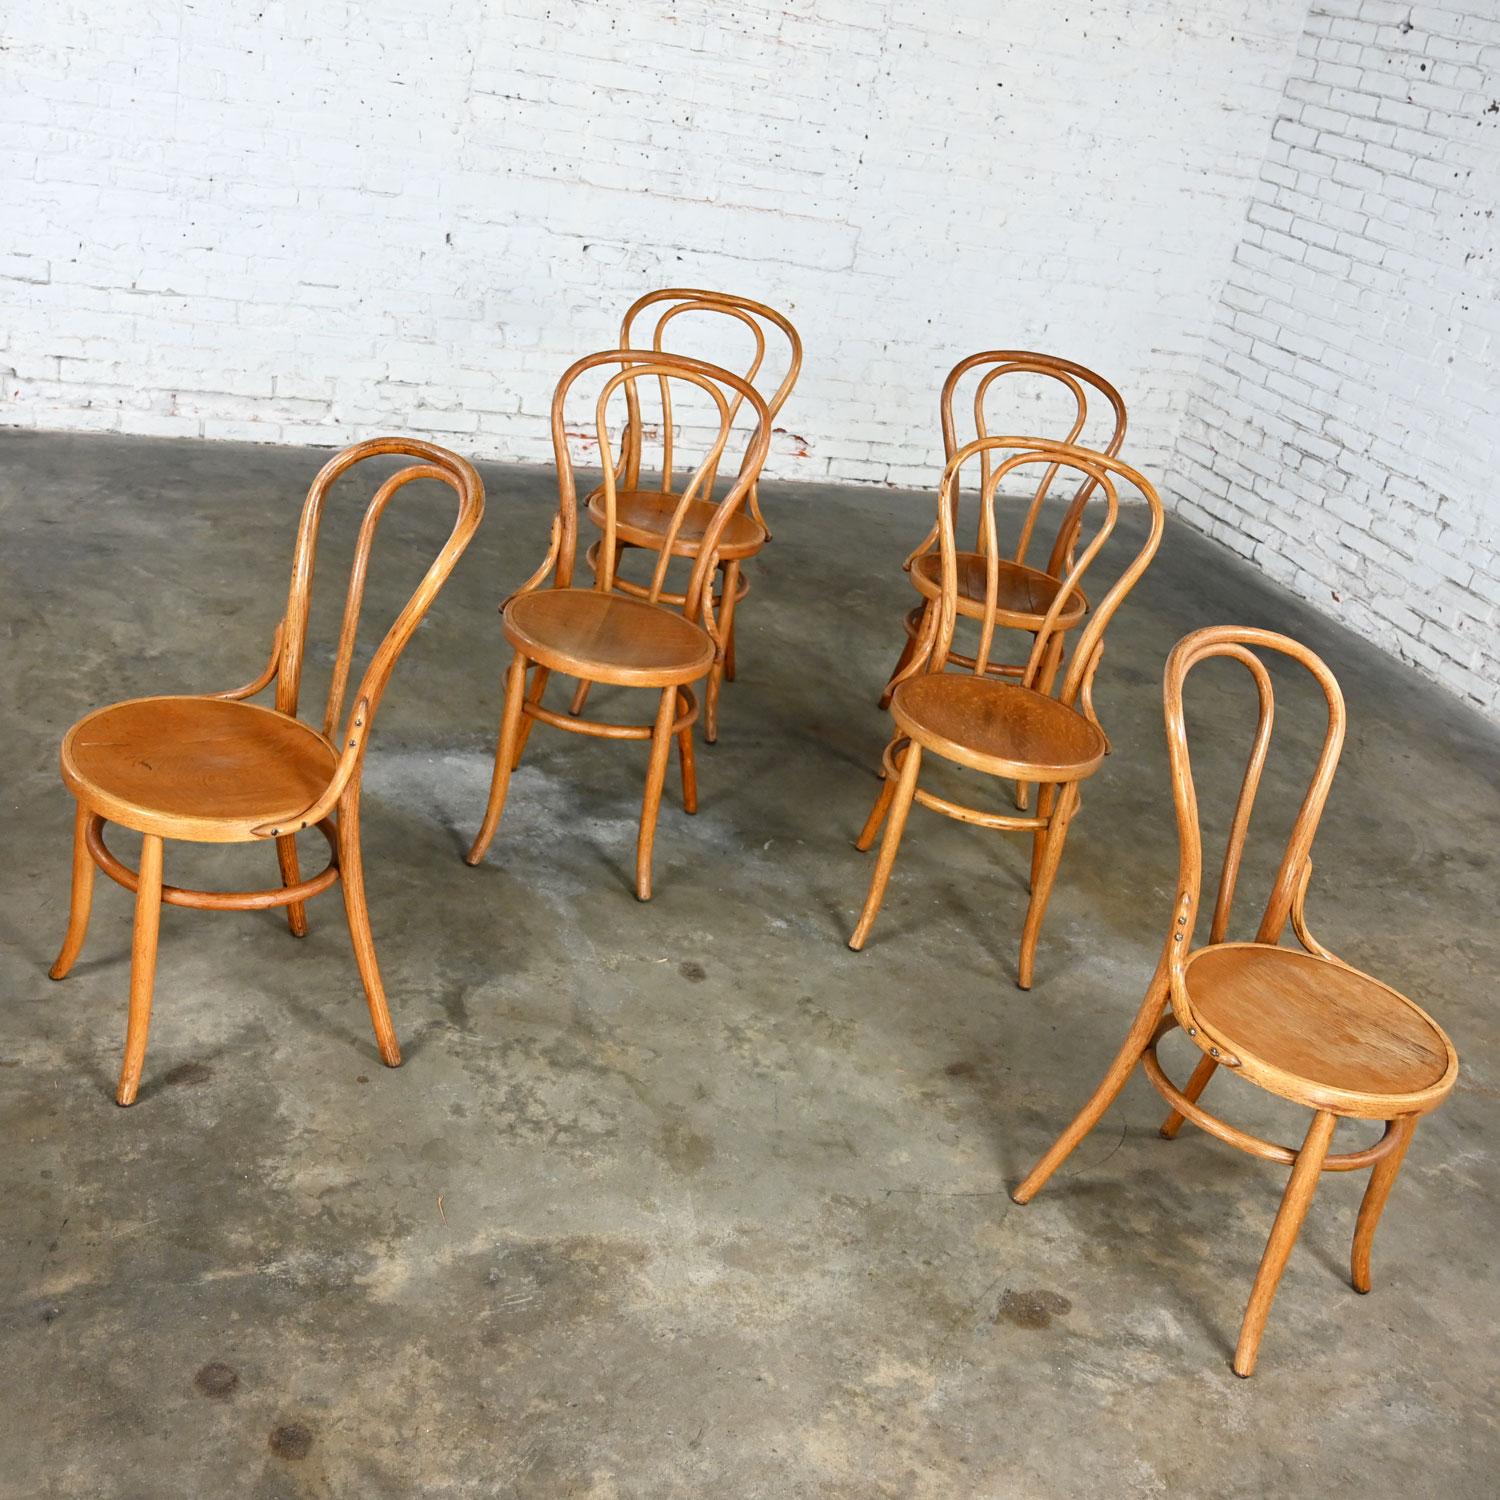 Unknown Bauhaus Oak Bentwood Chairs Attributed to Thonet #18 Café Chair Set of 6 For Sale